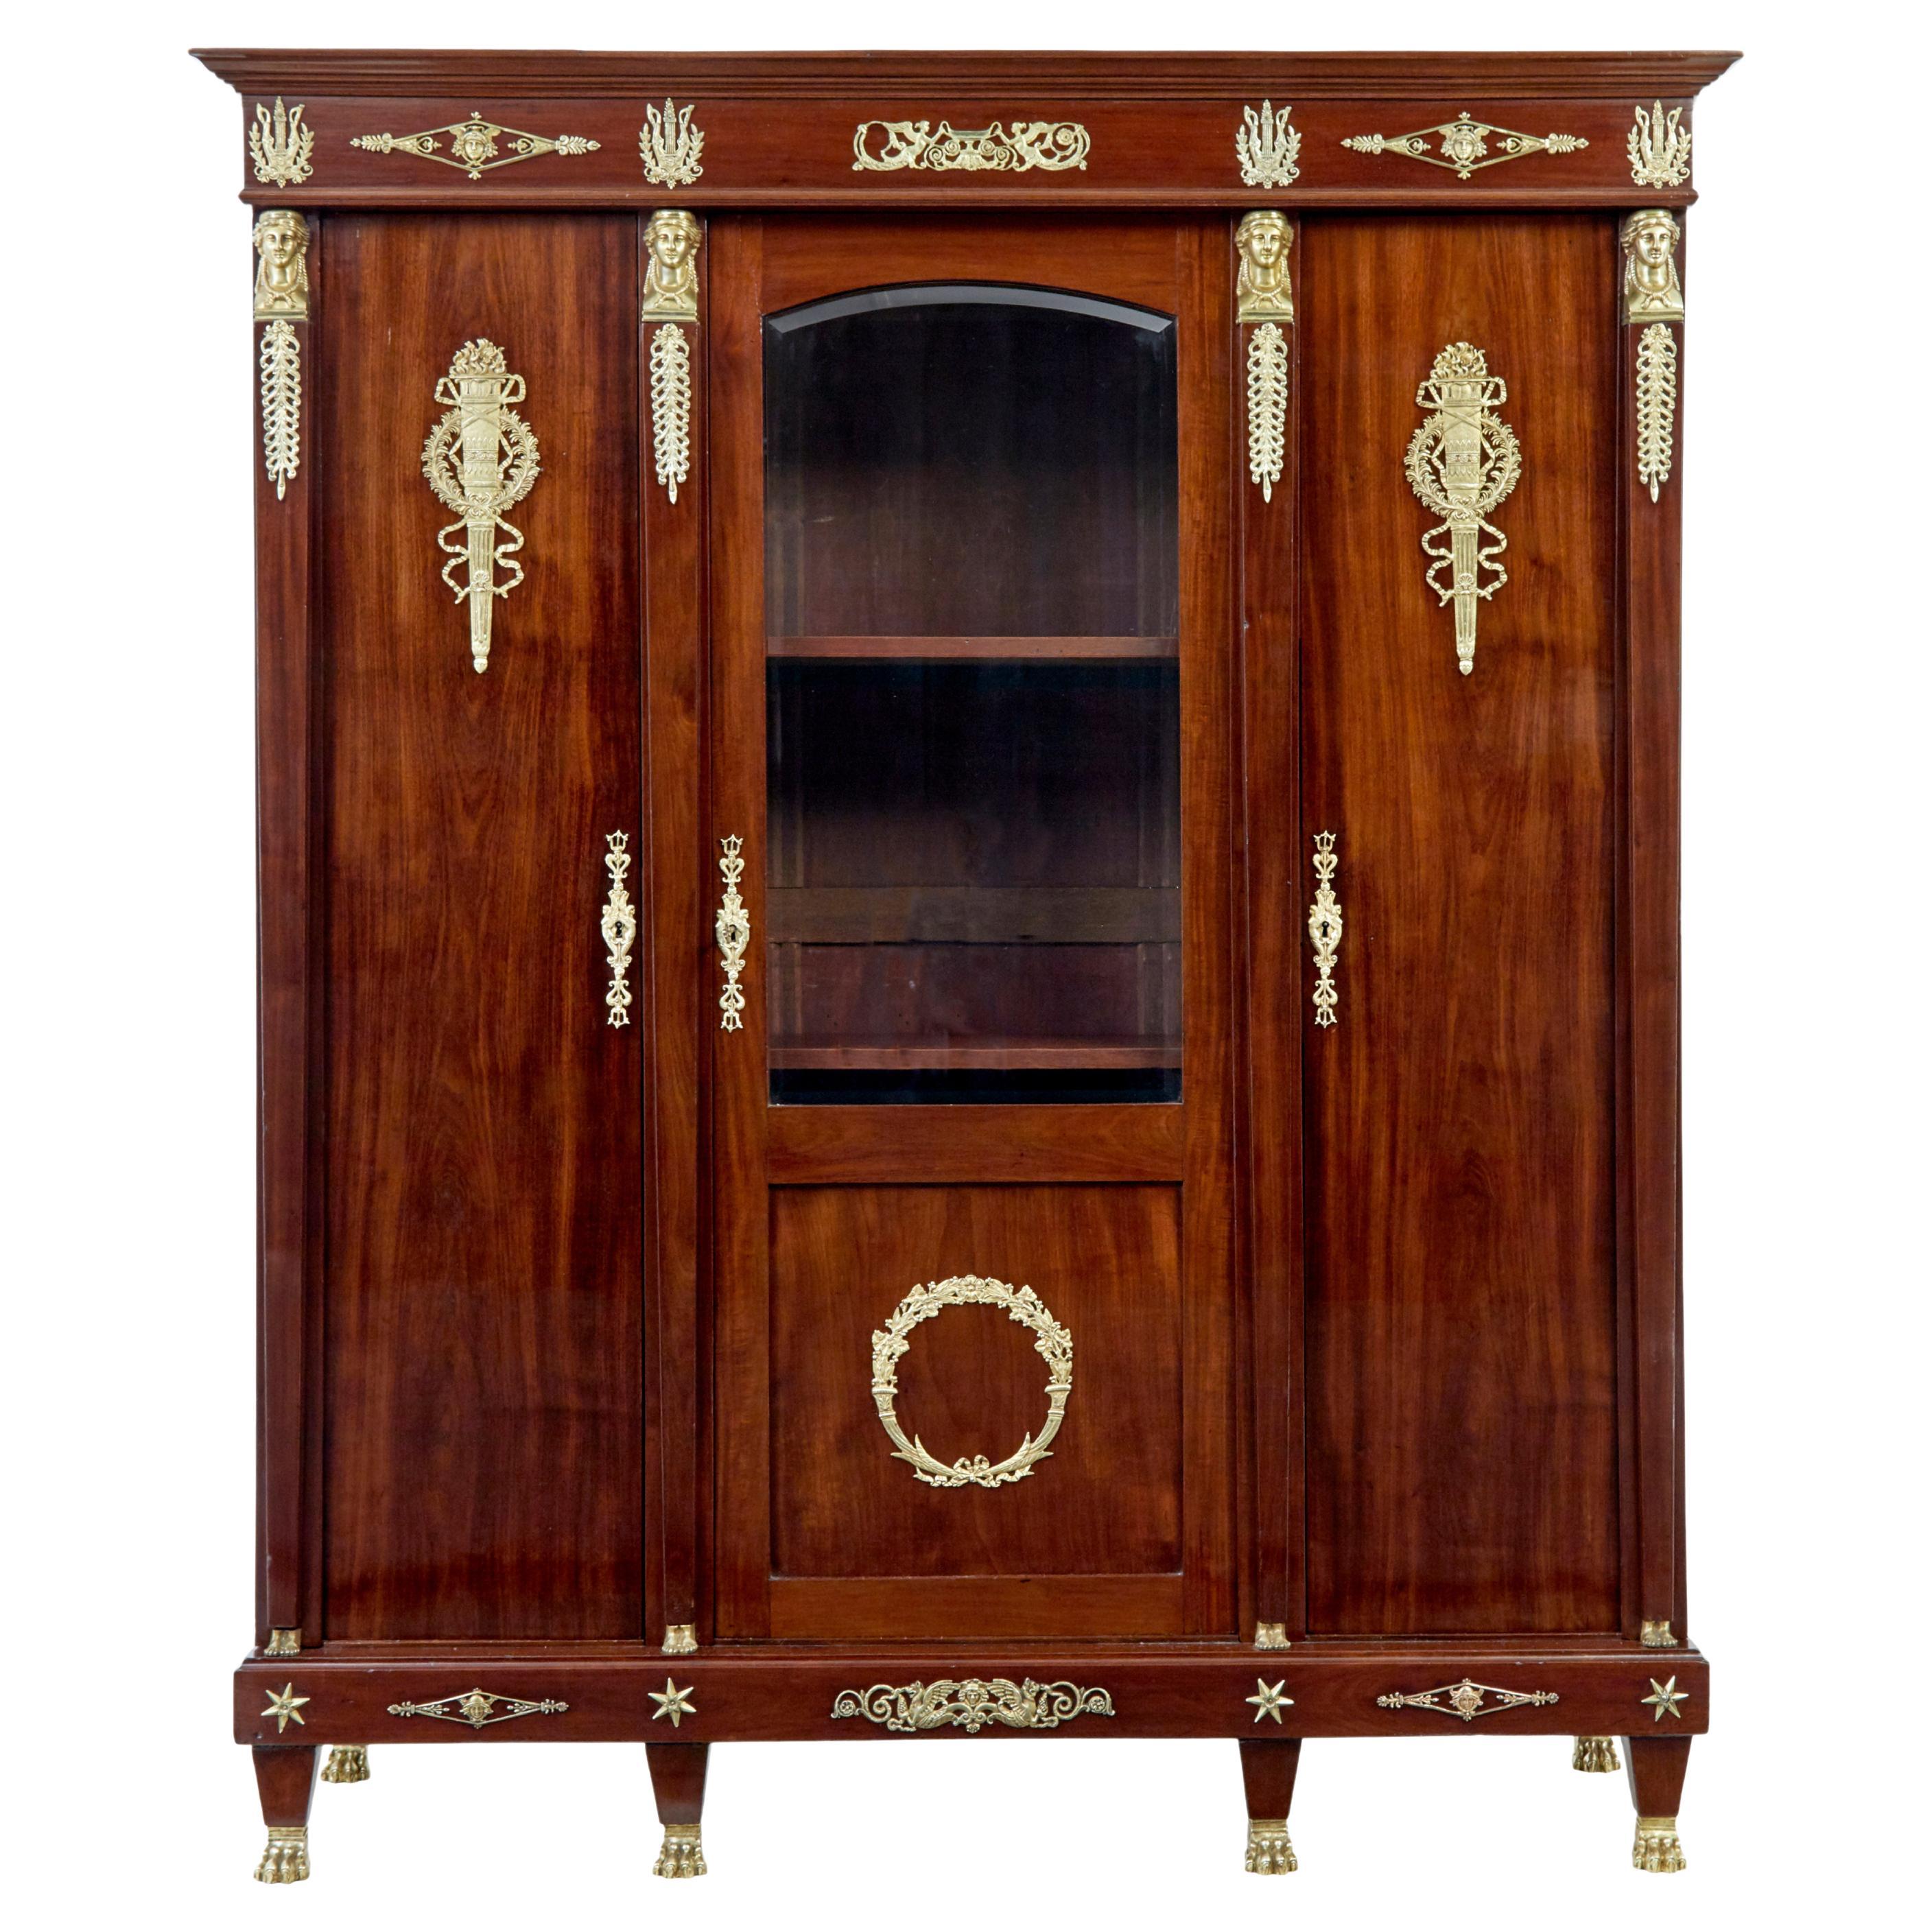 Late 19th century French empire mahogany and ormolu cabinet For Sale